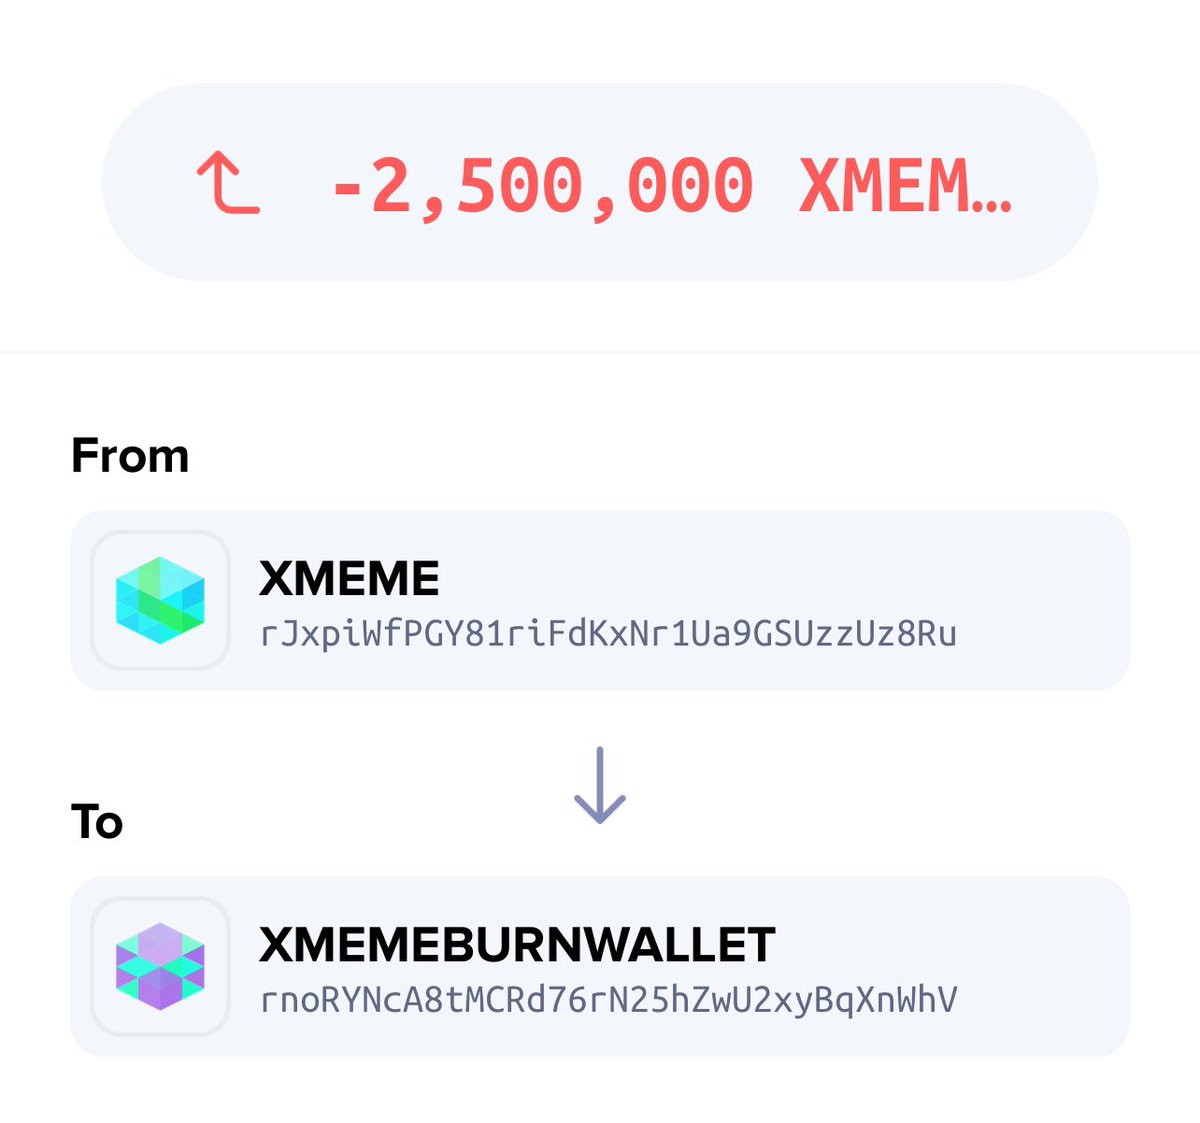 I just sent 2.5M $XMEME to the Community Burn Wallet! 🟩🧳🔥

Every Monday all coins in this wallet get burned. Go ahead and contribute fam. Let’s keep reducing XMEME total supply making it even more scarce. We are different! 

rnoRYNcA8tMCRd76rN25hZwU2xyBqXnWhV